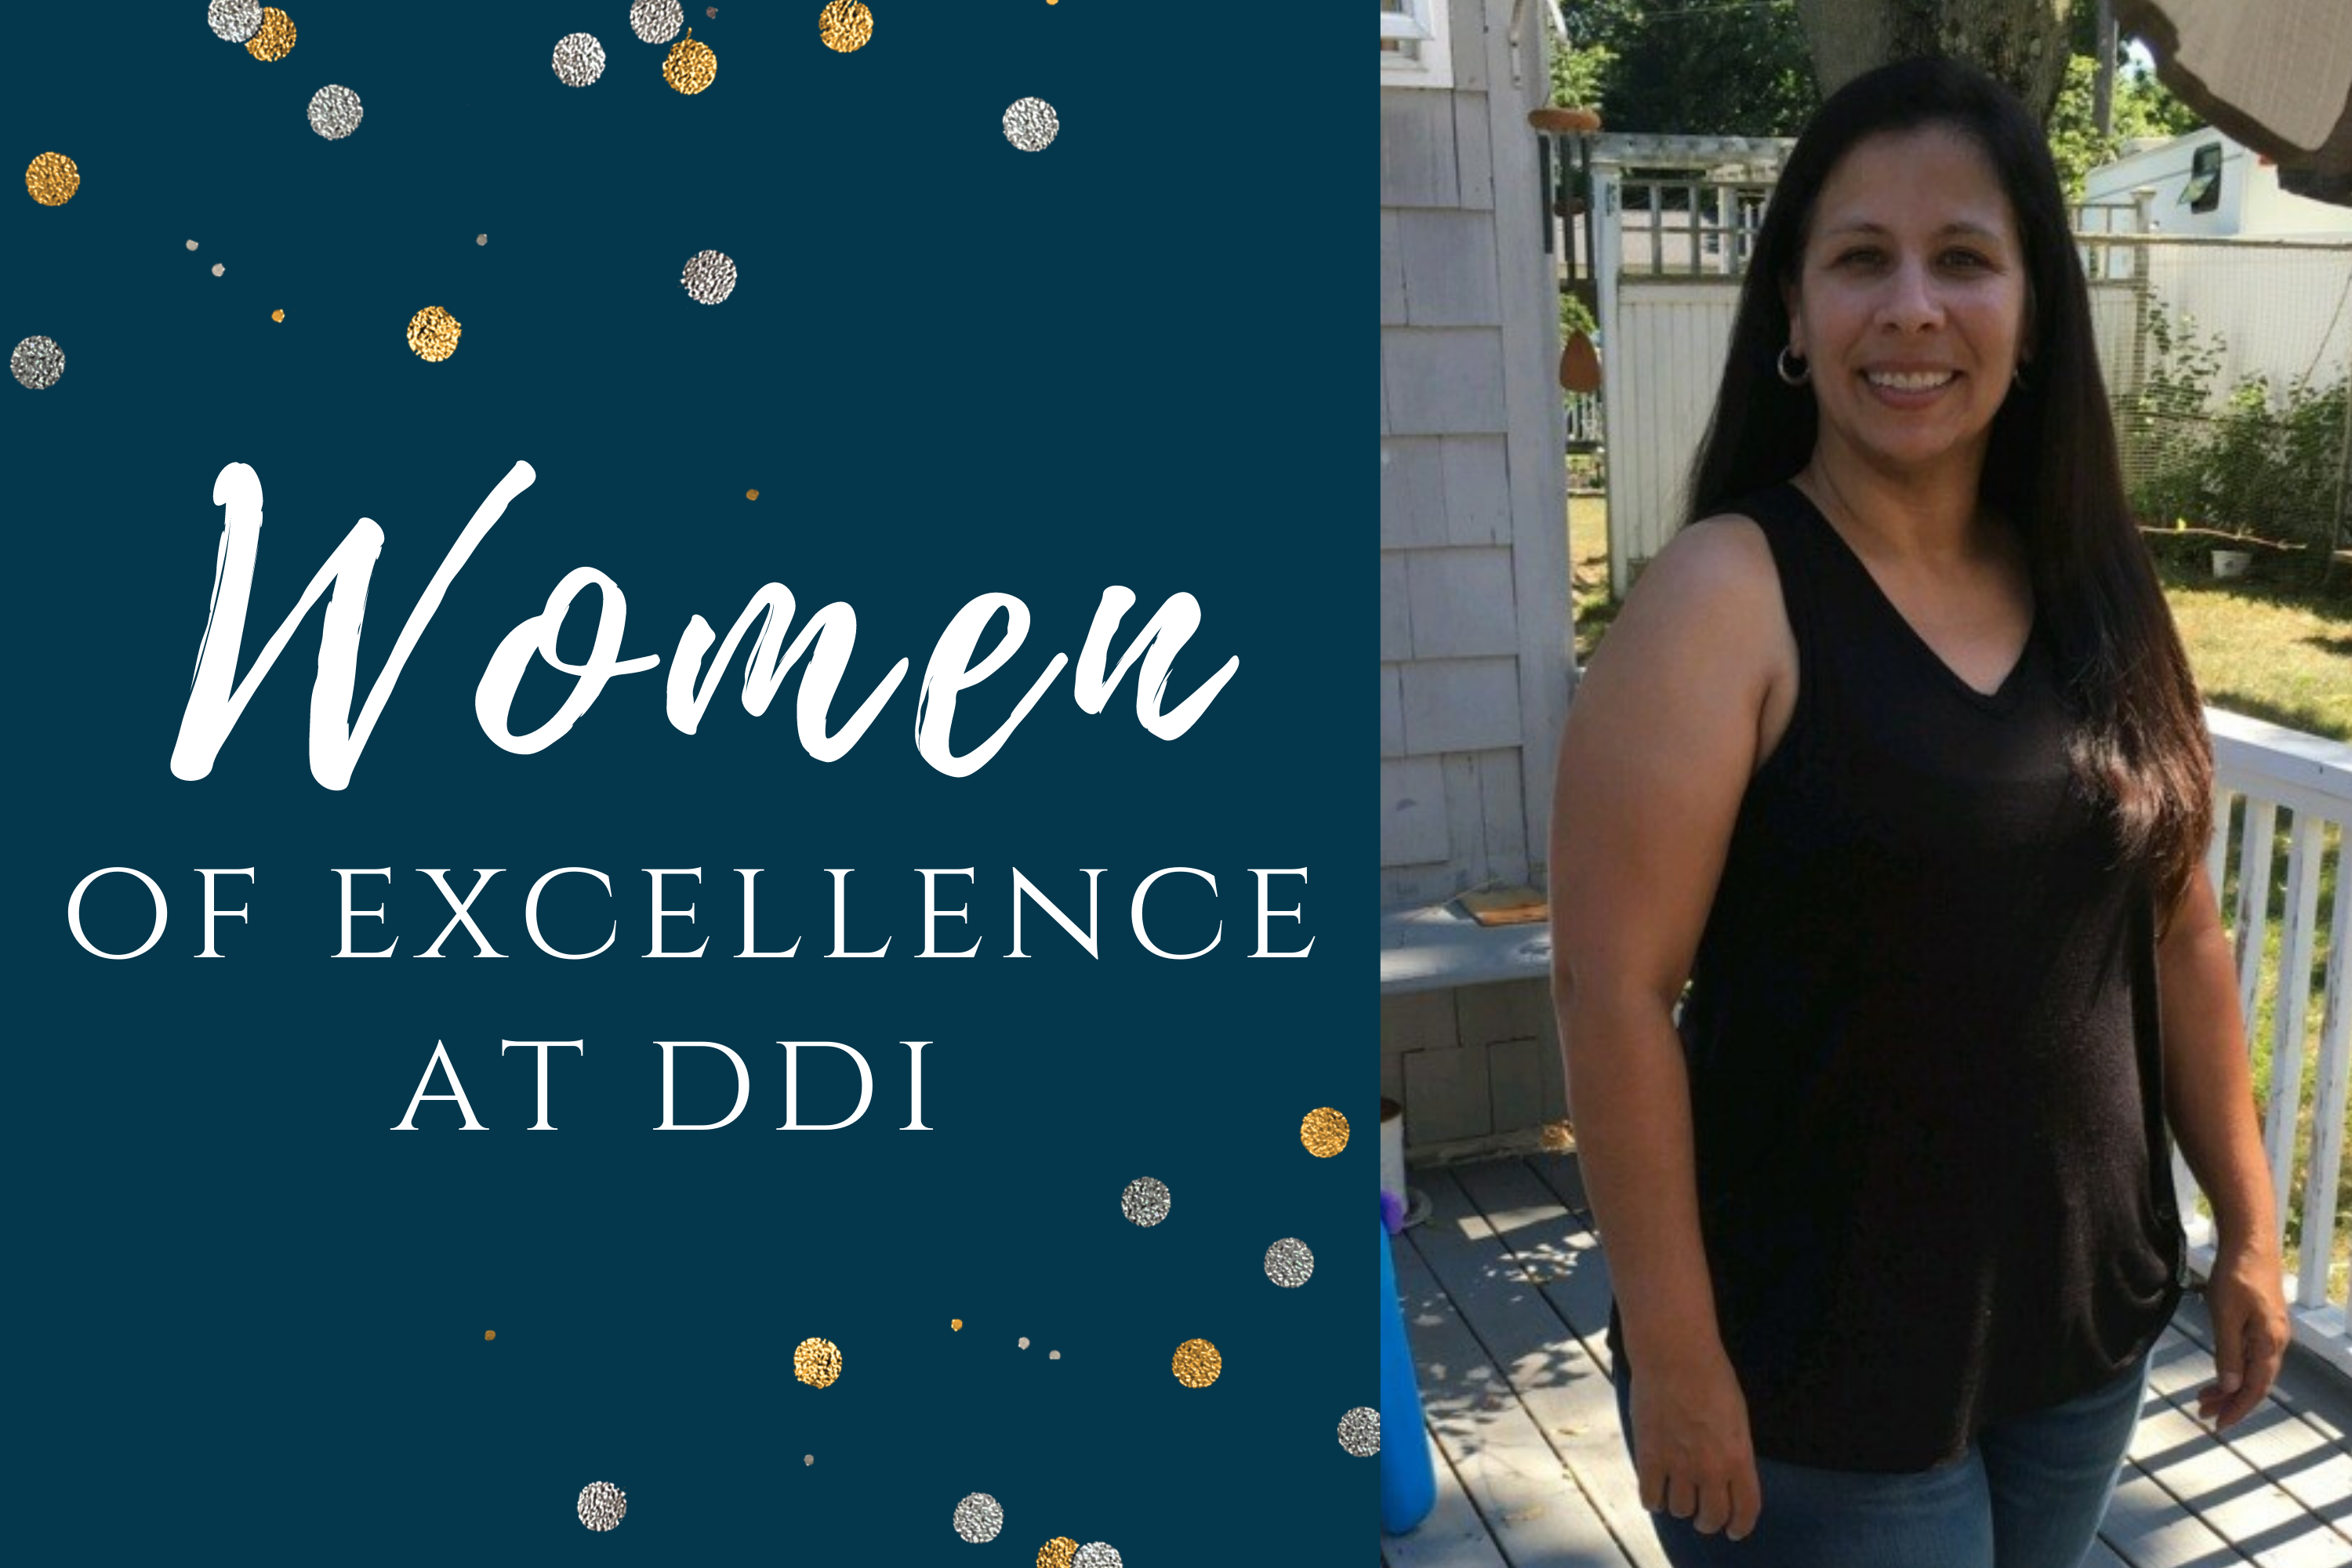 Women of Excellence at DDI_Jacqueline Ocasio